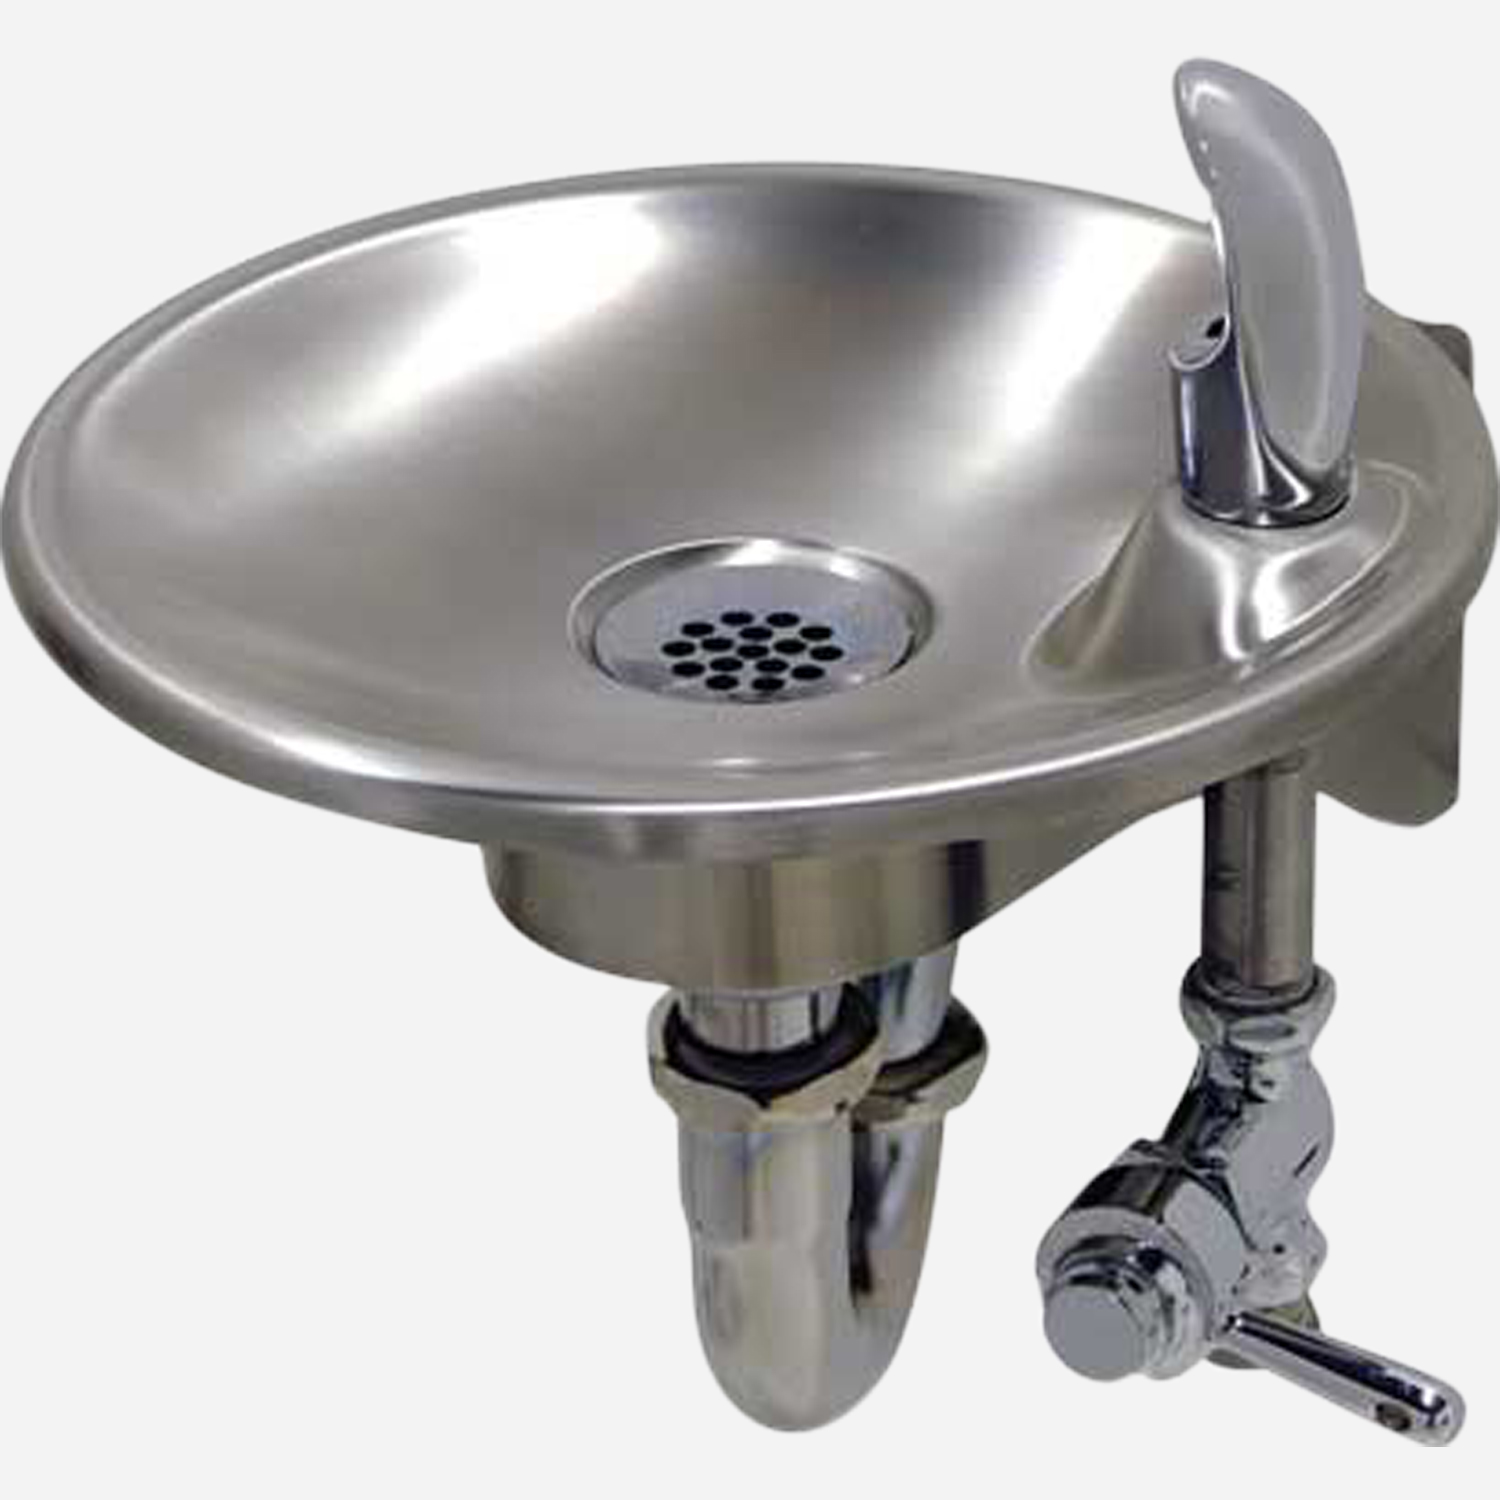 All-Steel, SS bubbler with lever handle